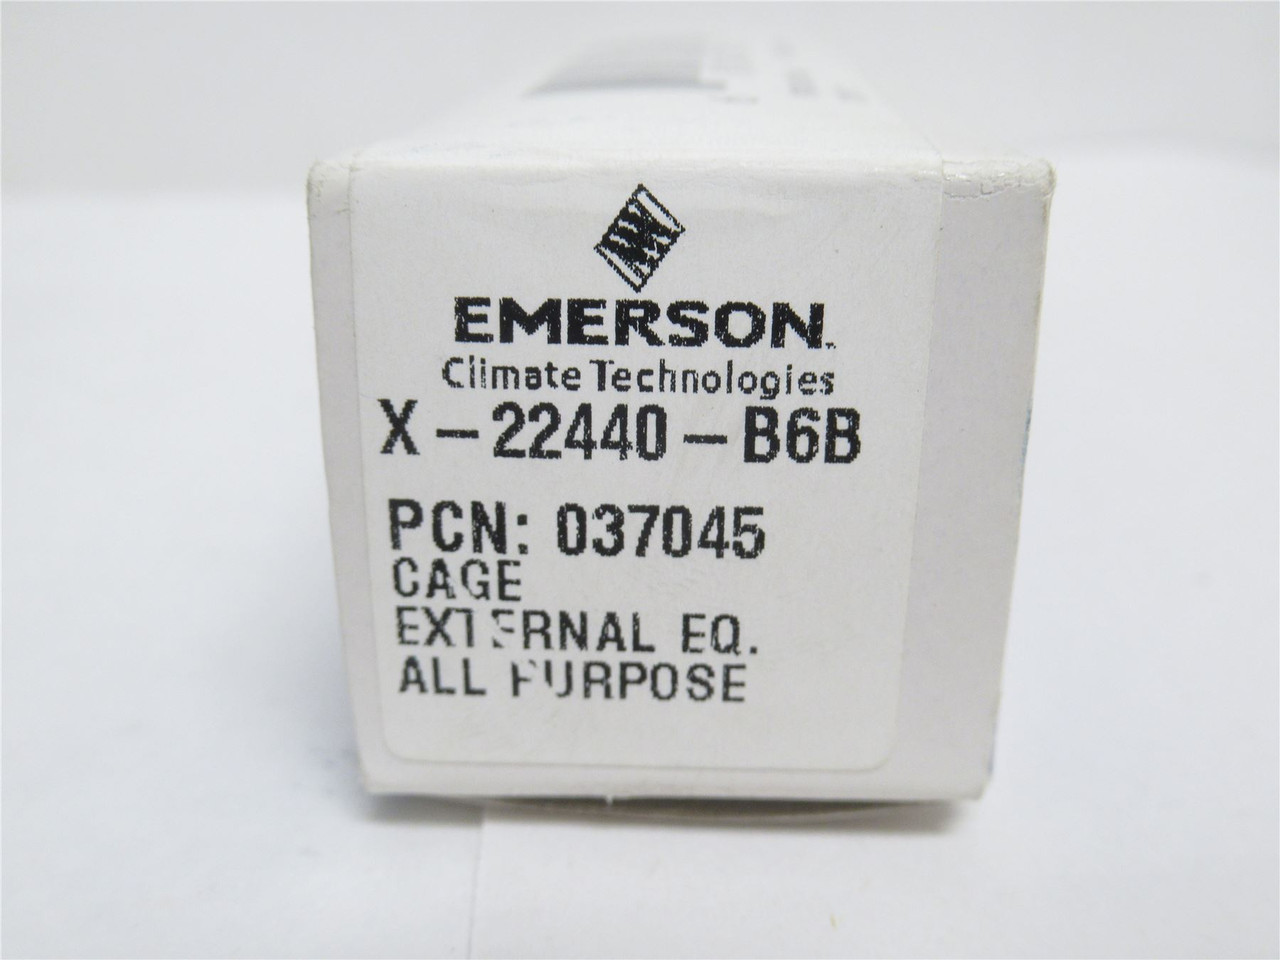 Emerson X-22440-B6B; Solenoid Valve Cage Assembly